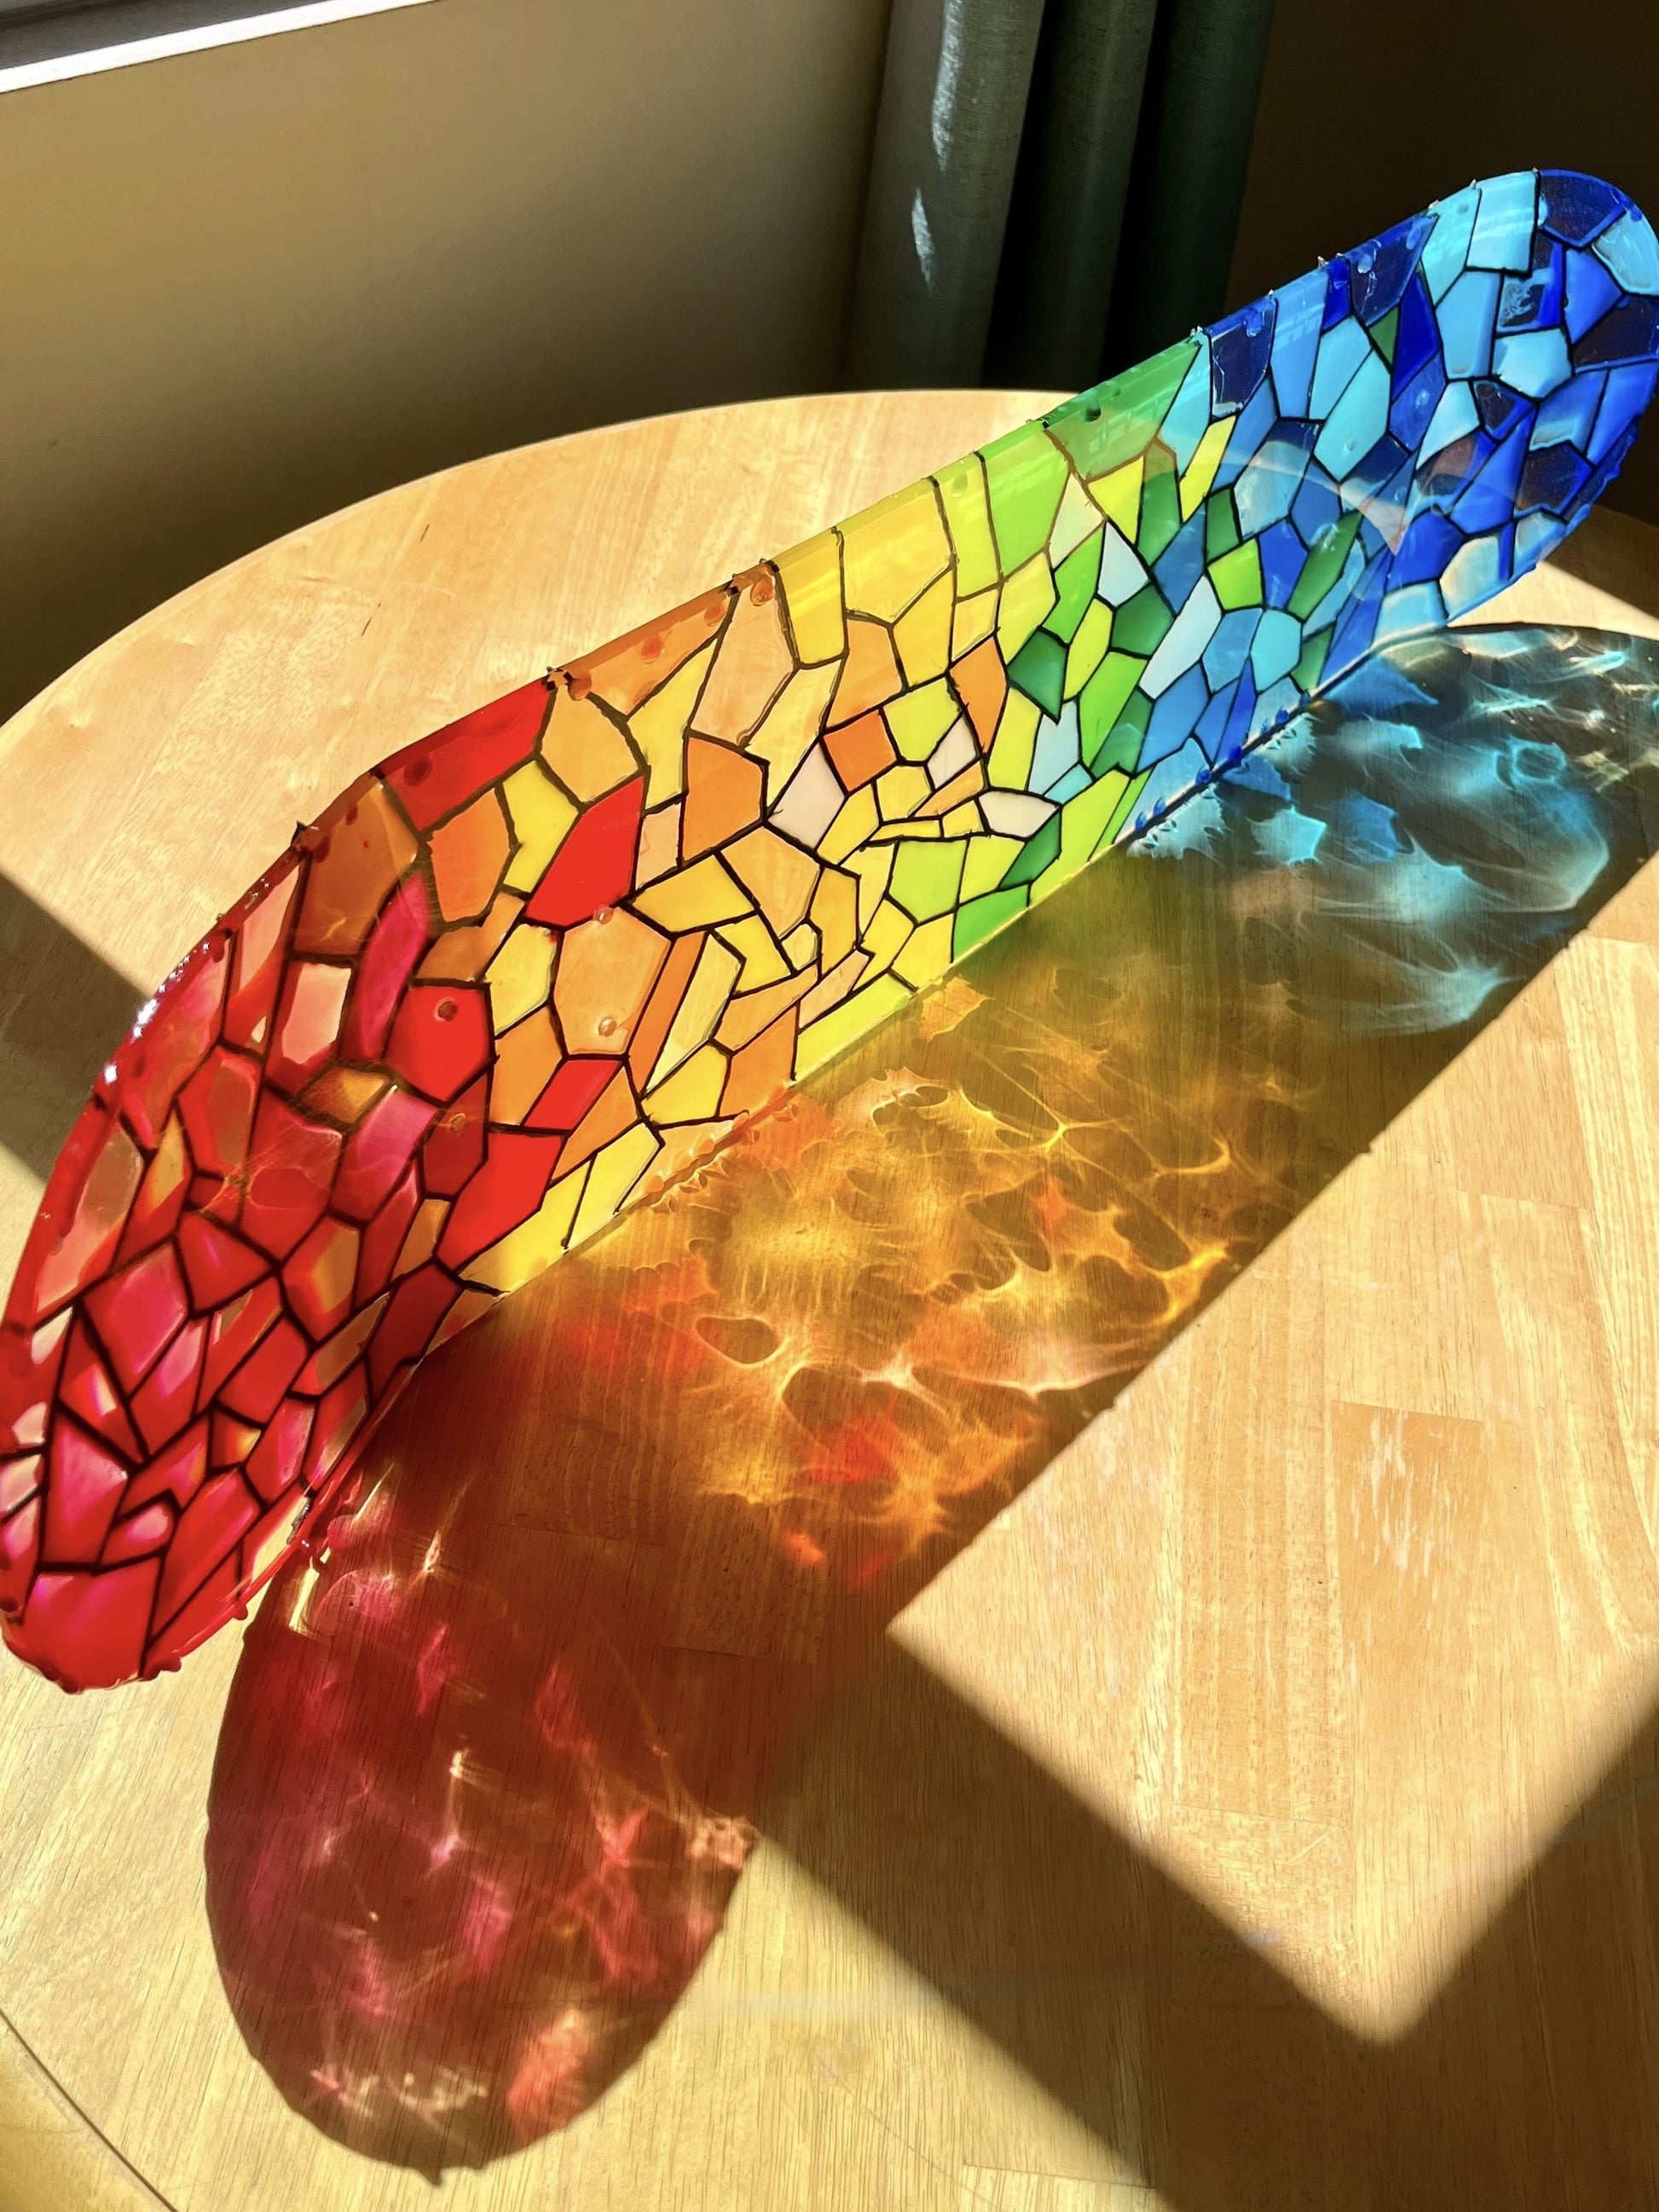 A rainbow stained glass skateboard deck casting a rainbow shadow on a wooden table.